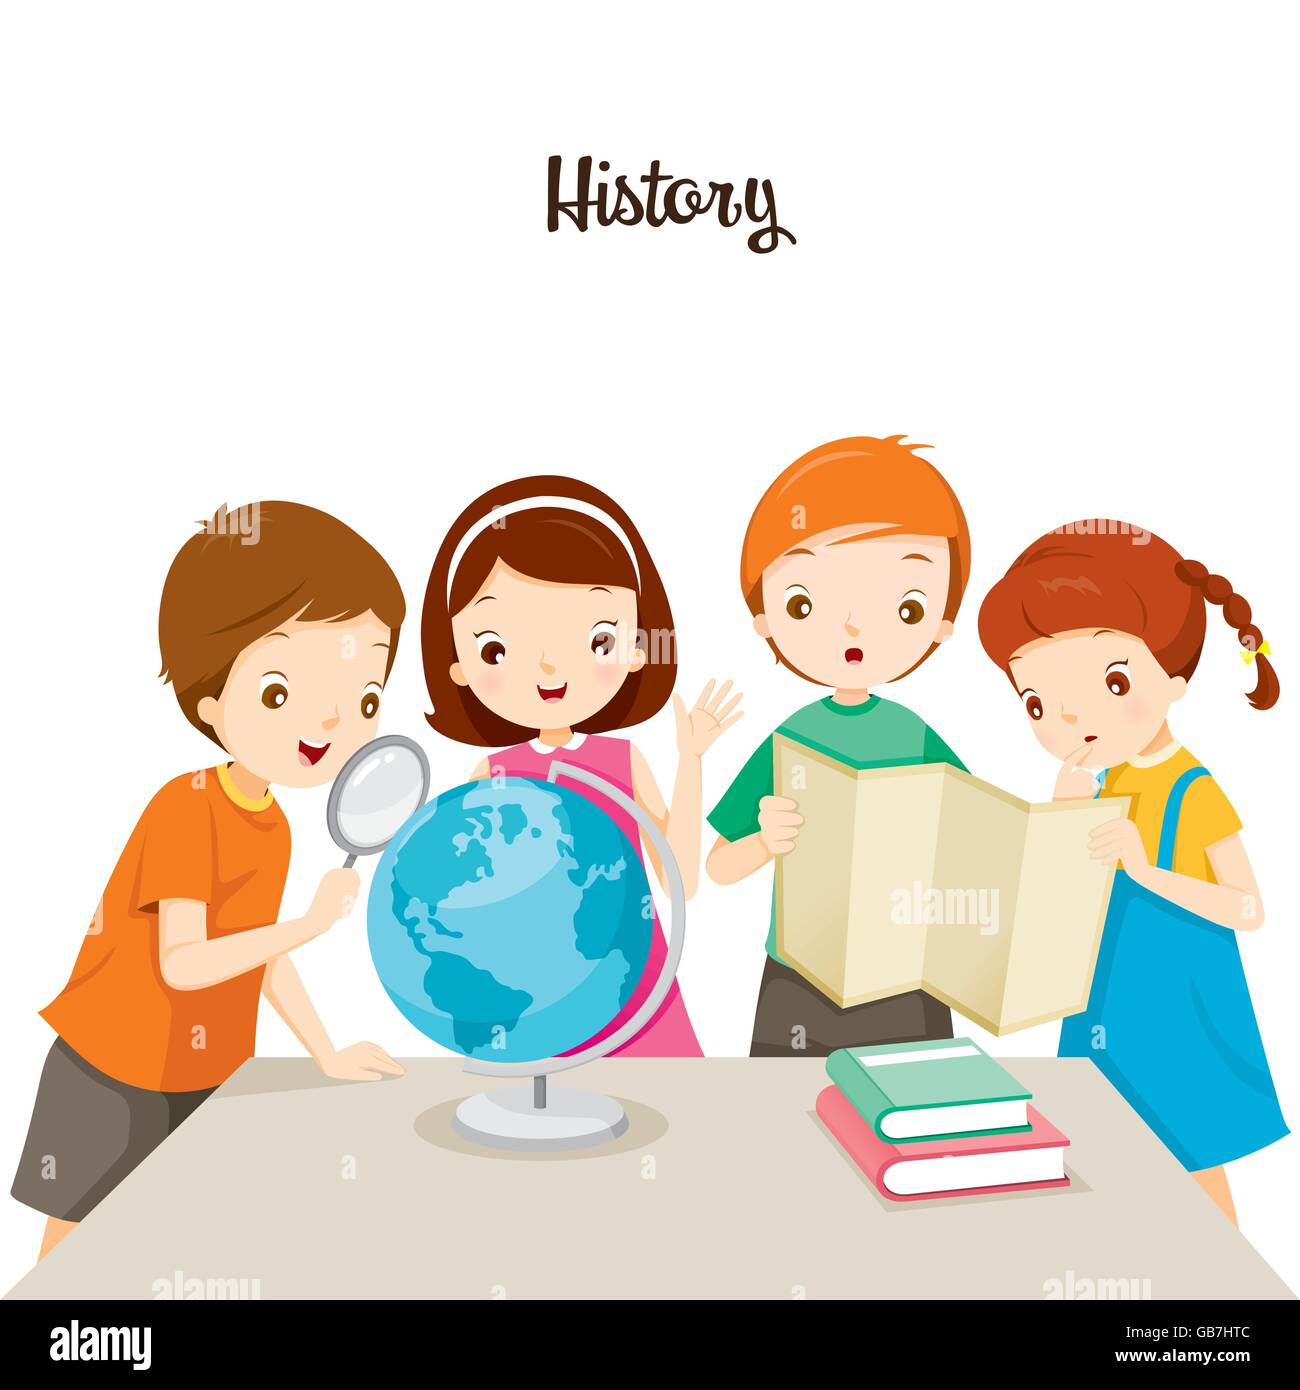 Children In History Class, Back to school, Educational, Stationery, Book, Children, Subjects, Knowledge, Teaching Aid Stock Vector